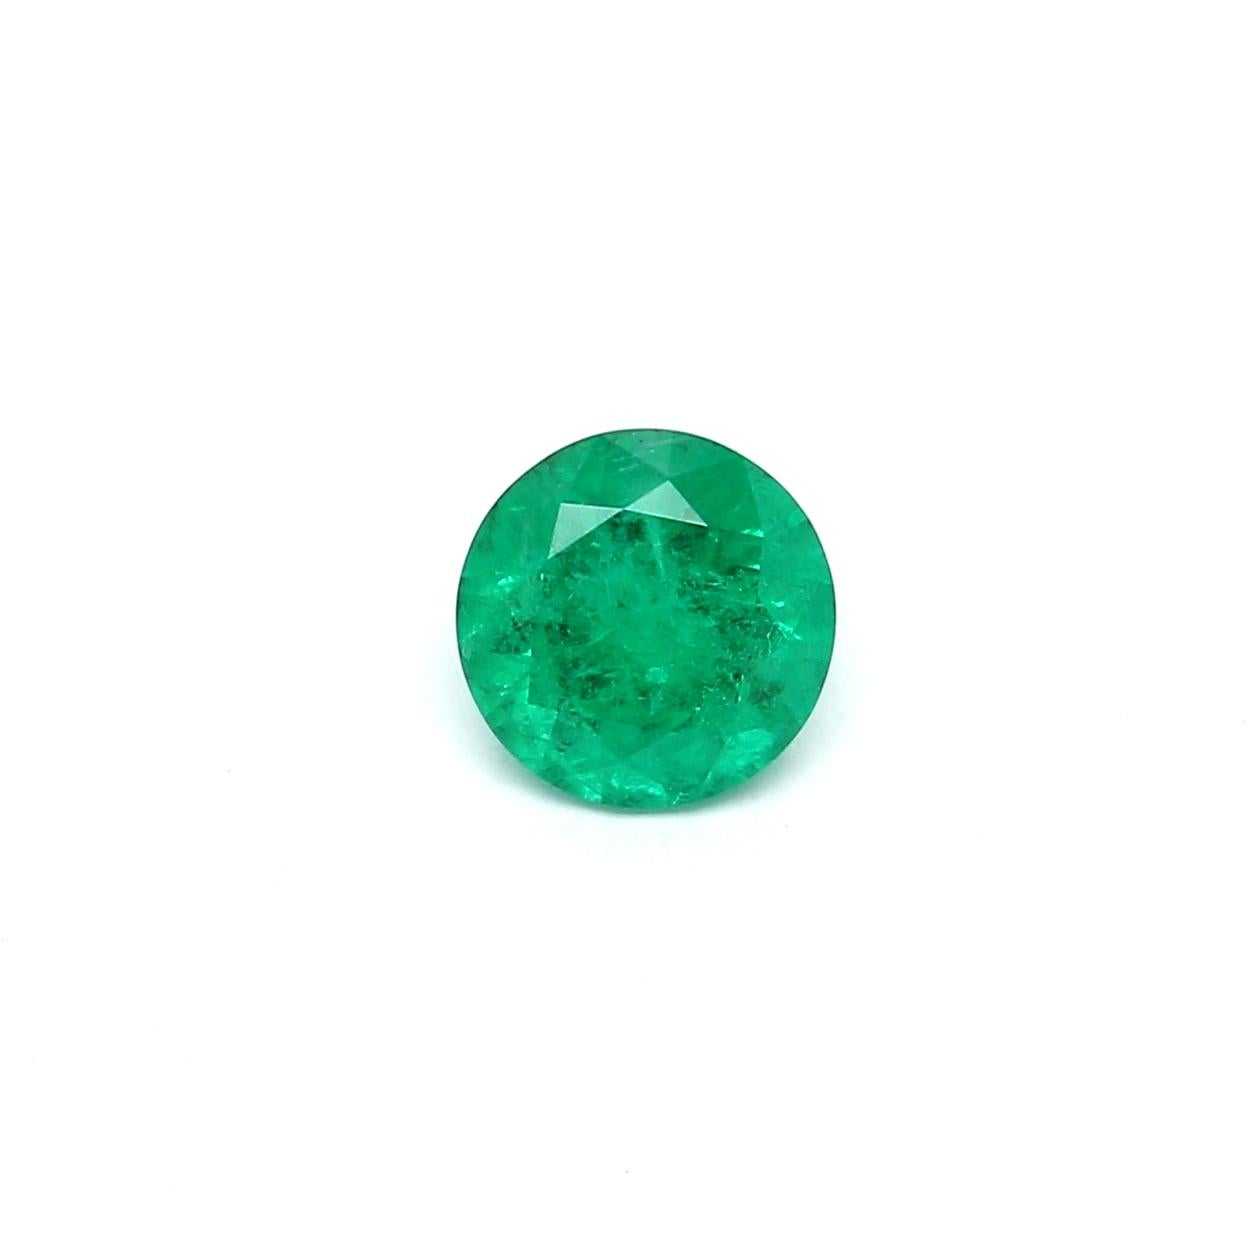 An amazing Russian Emerald which allows jewelers to create a unique piece of wearable art.
This exceptional quality gemstone would make a custom-made jewelry design. Perfect for a Ring or Pendant.

Shape - Round
Weight - 0.91 ct
Treatment -